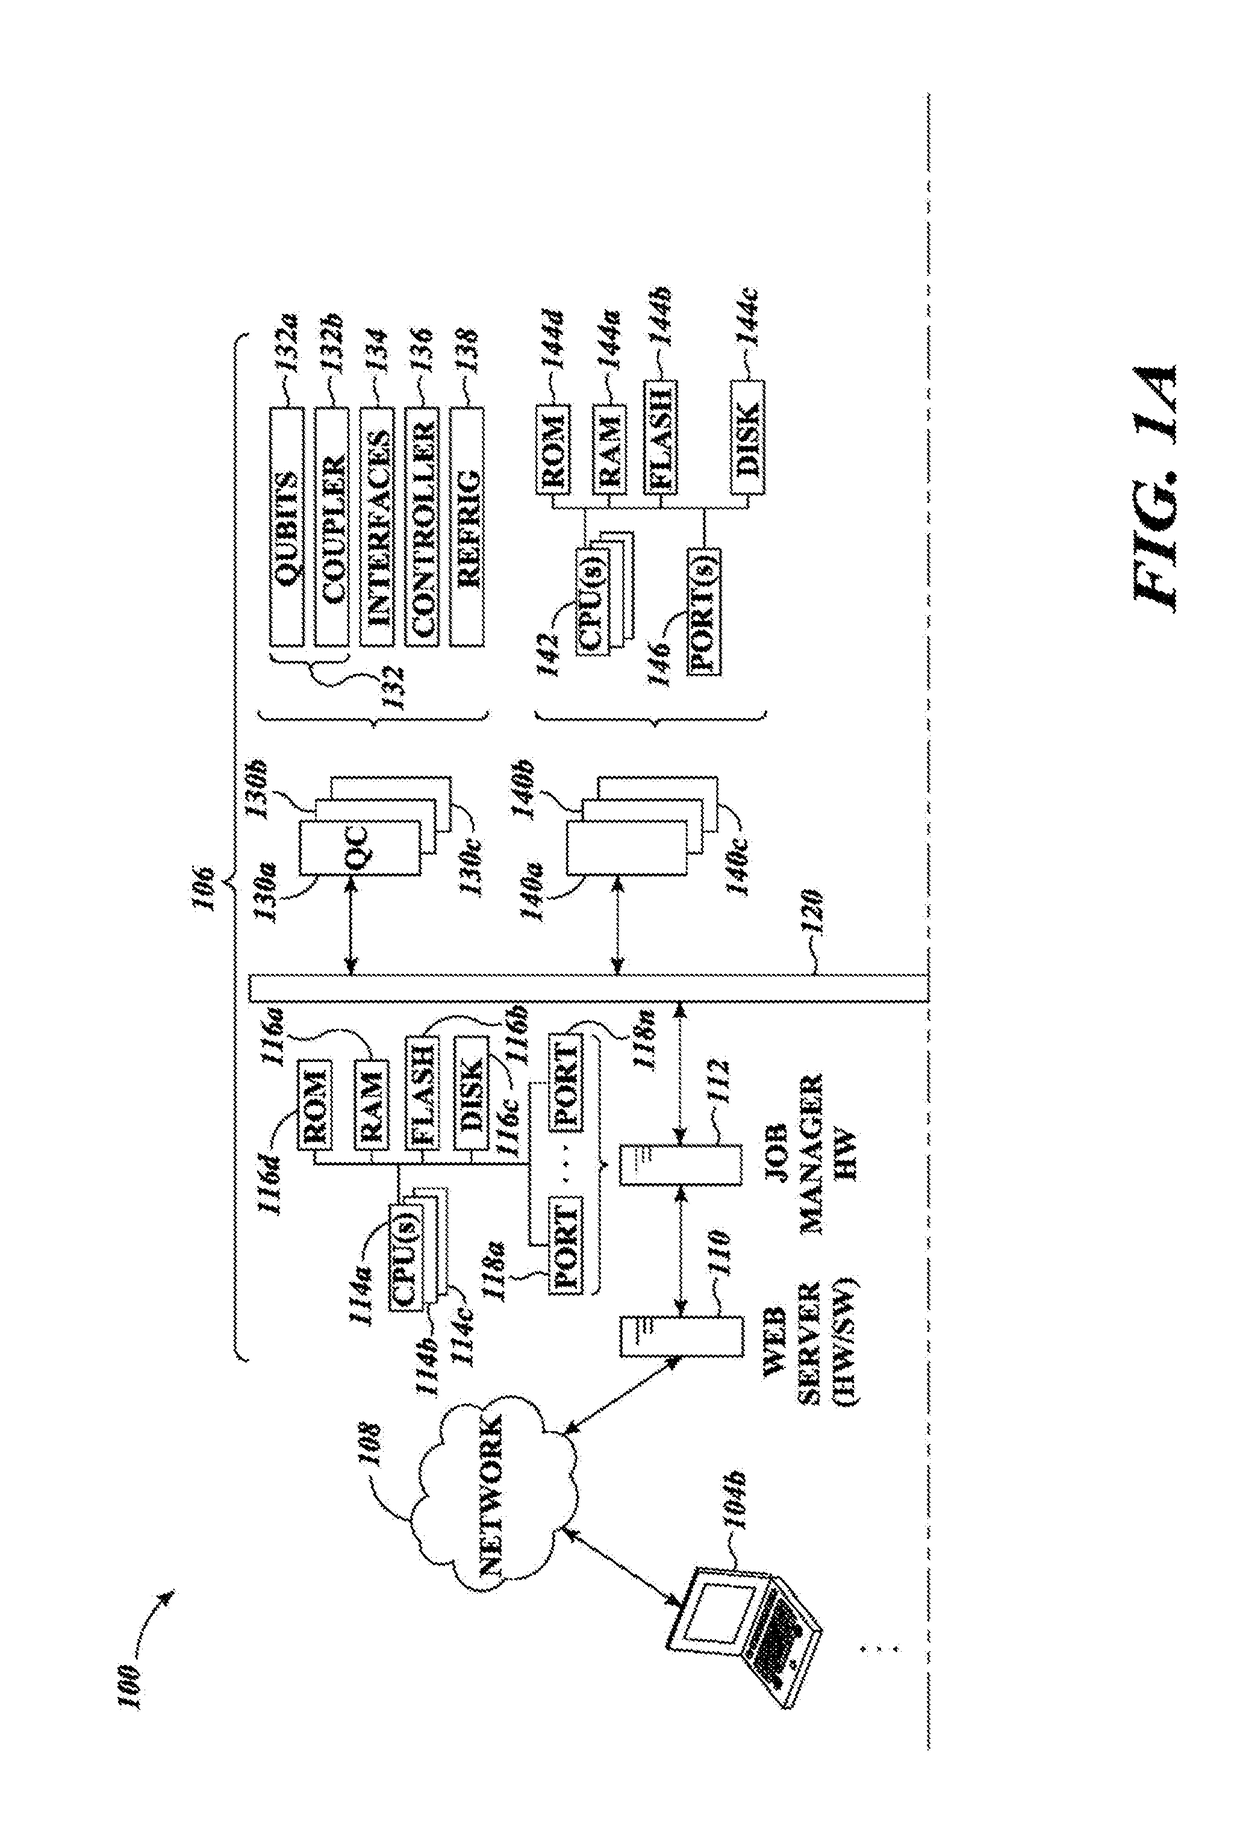 Systems and methods for improving the performance of a quantum processor via reduced readouts